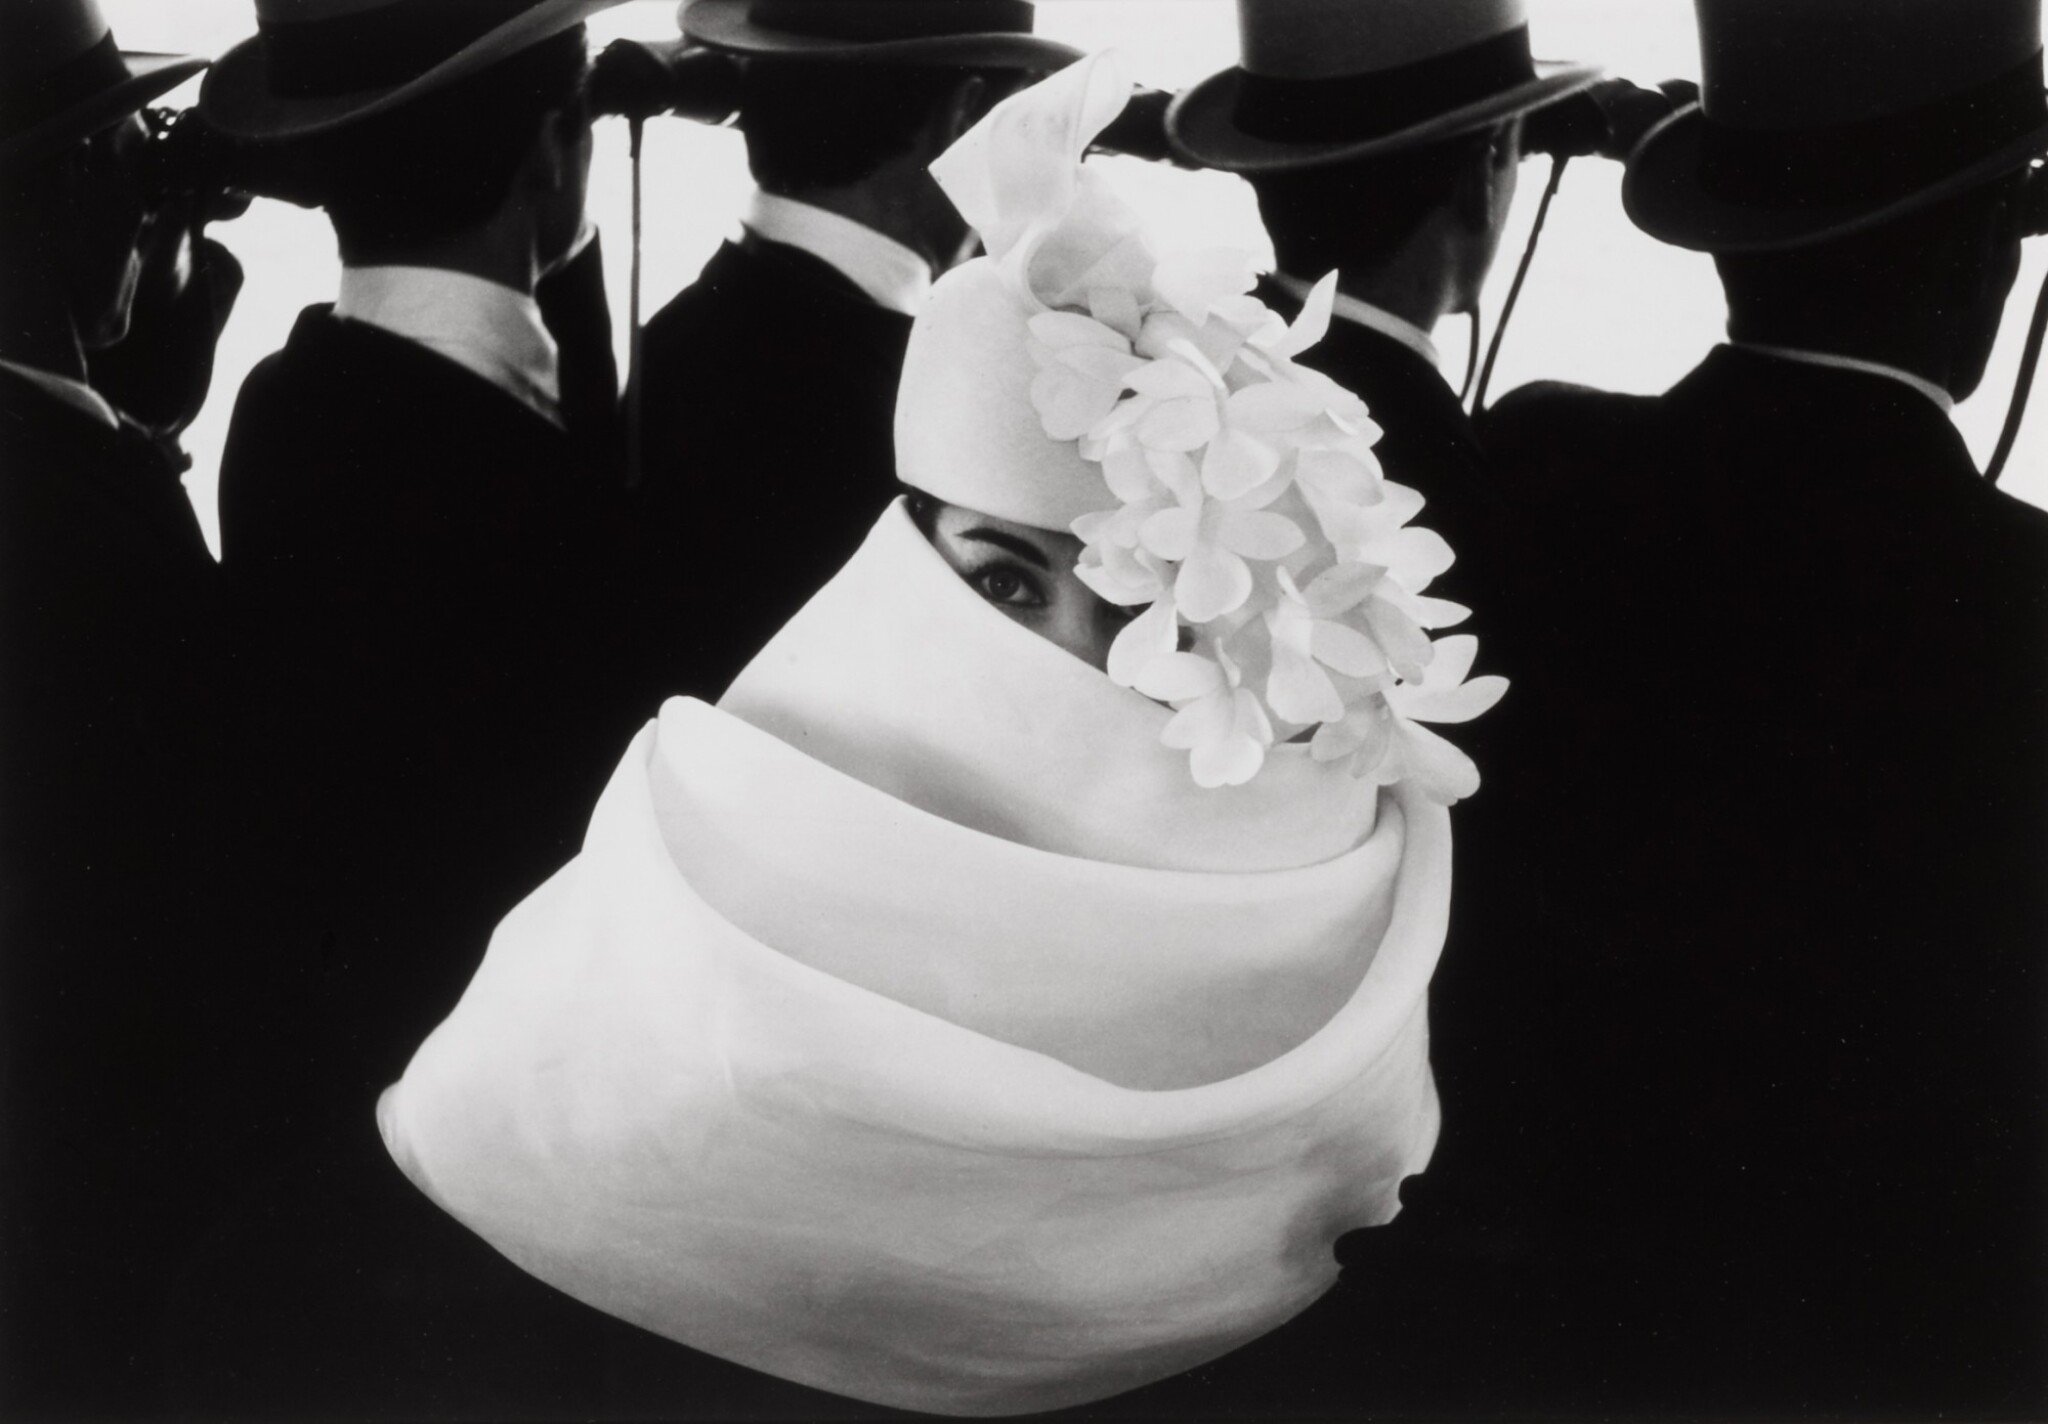 Frank Horvat, Givenchy Hat (A) for Le Jardin Des Modes, 1958, Gelatin Silver Print, 15 x 19 inches, courtesy of HackelBury Fine Art